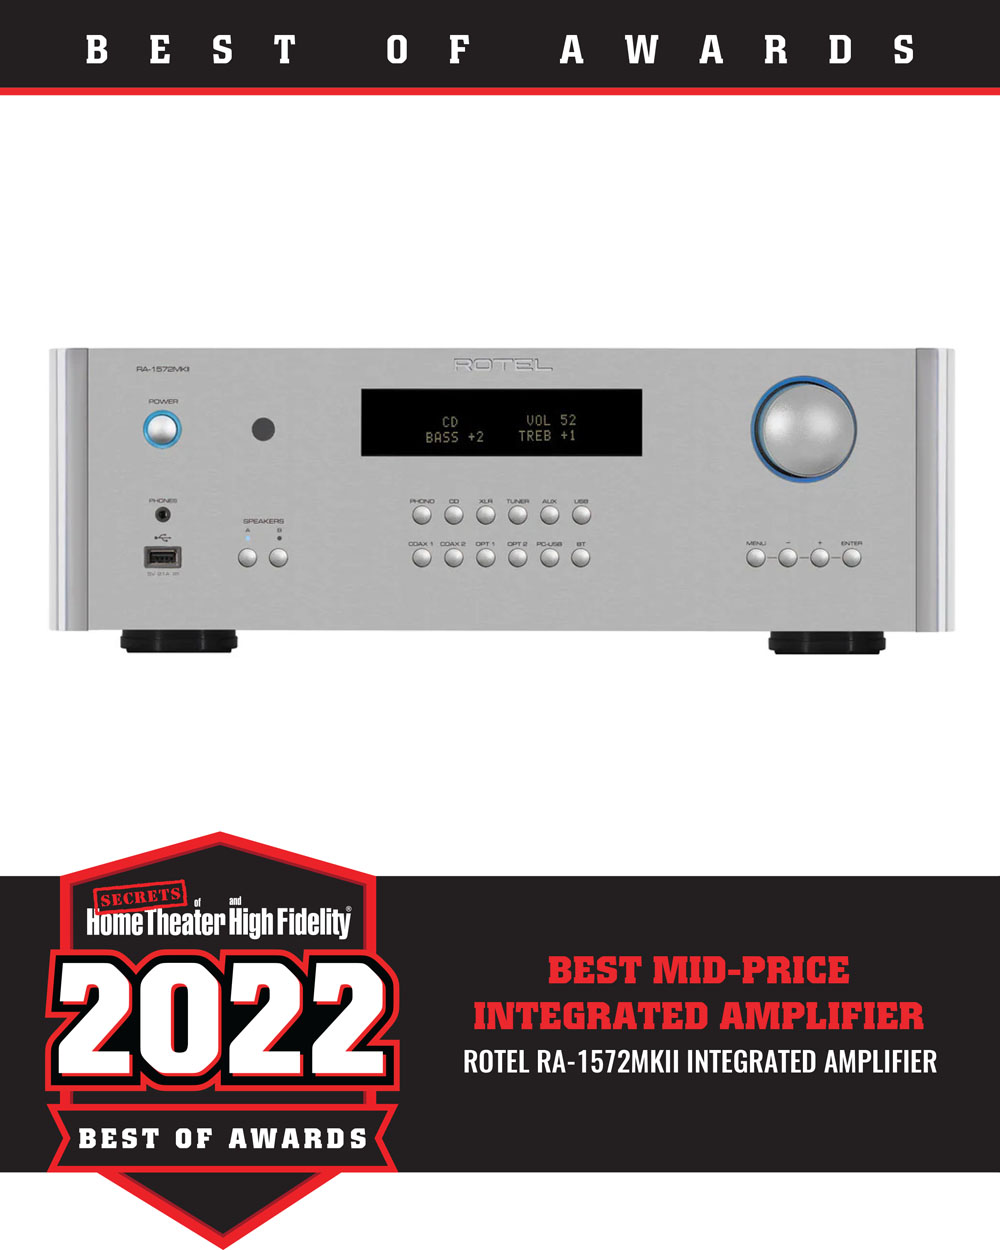 Rotel RA-1572MKII Integrated Amplifier Best of 2022 Award